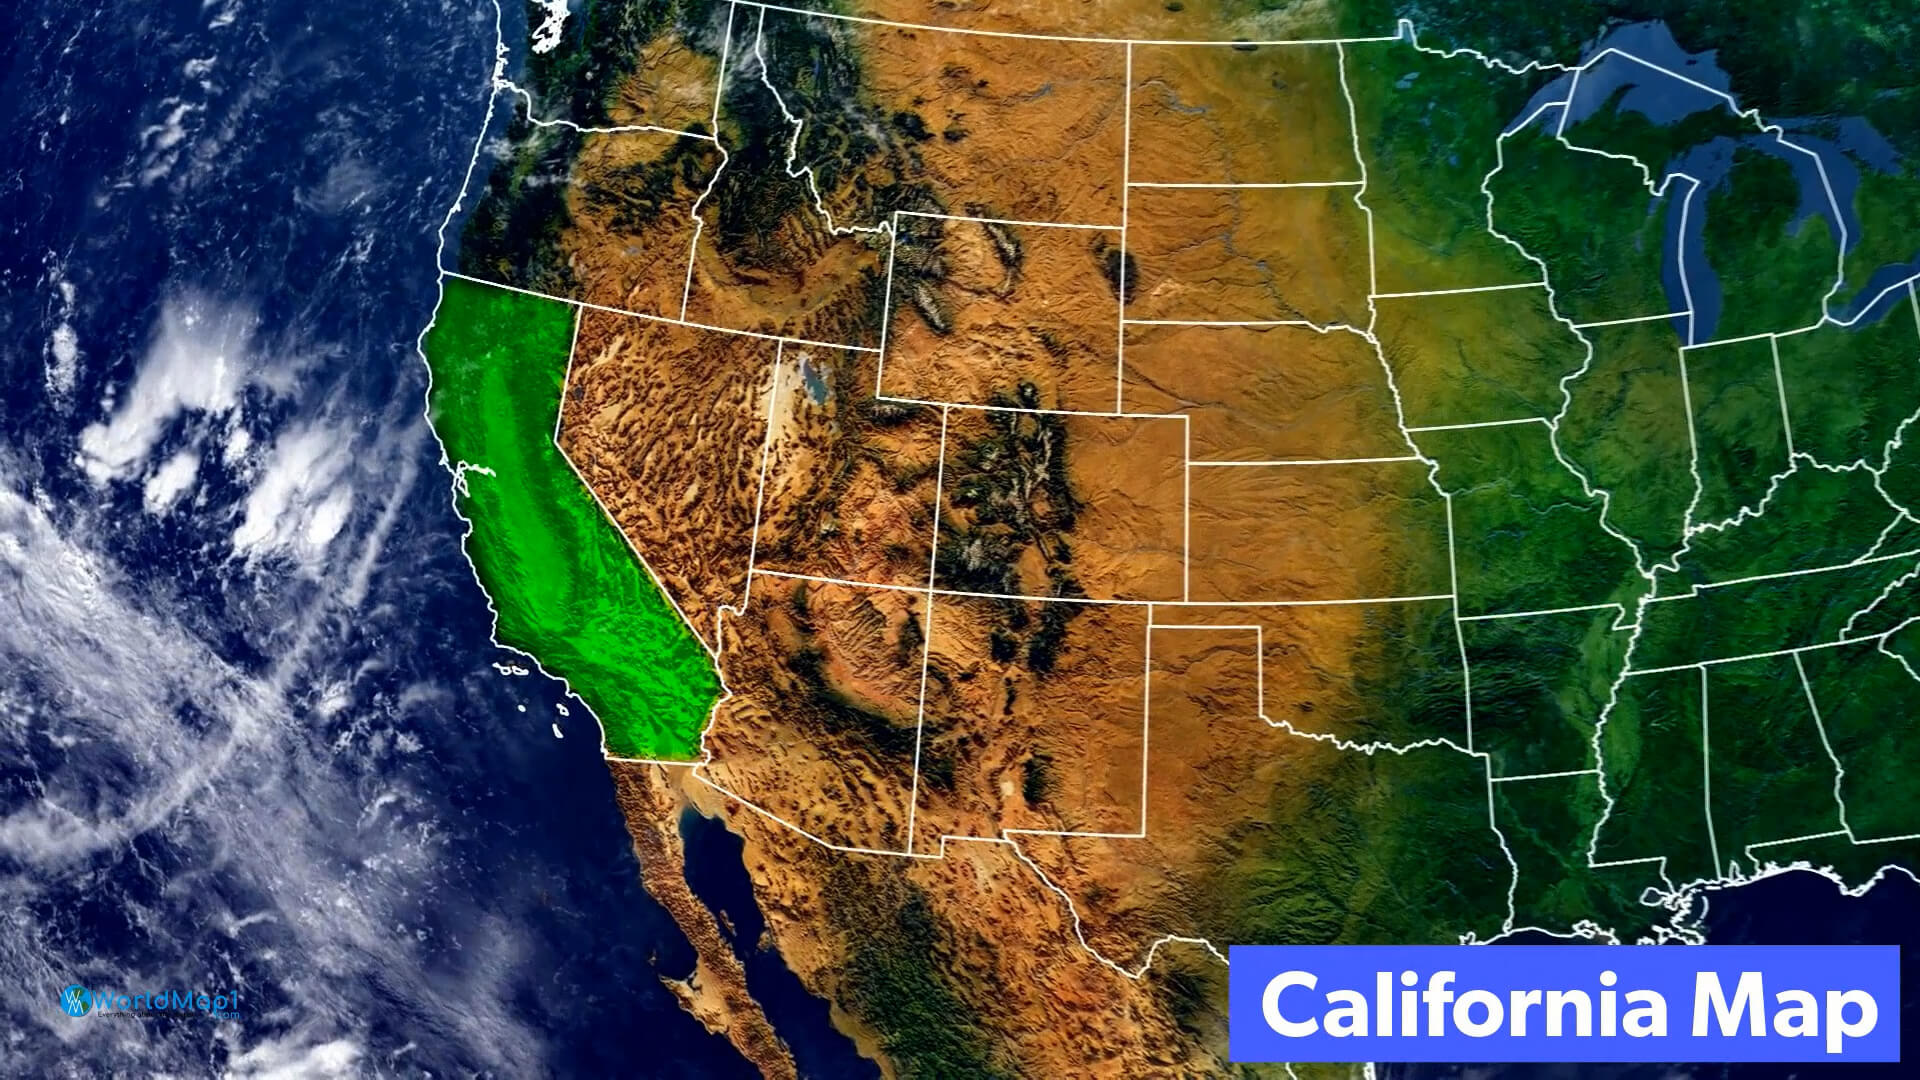 California Map and US States Satellite View